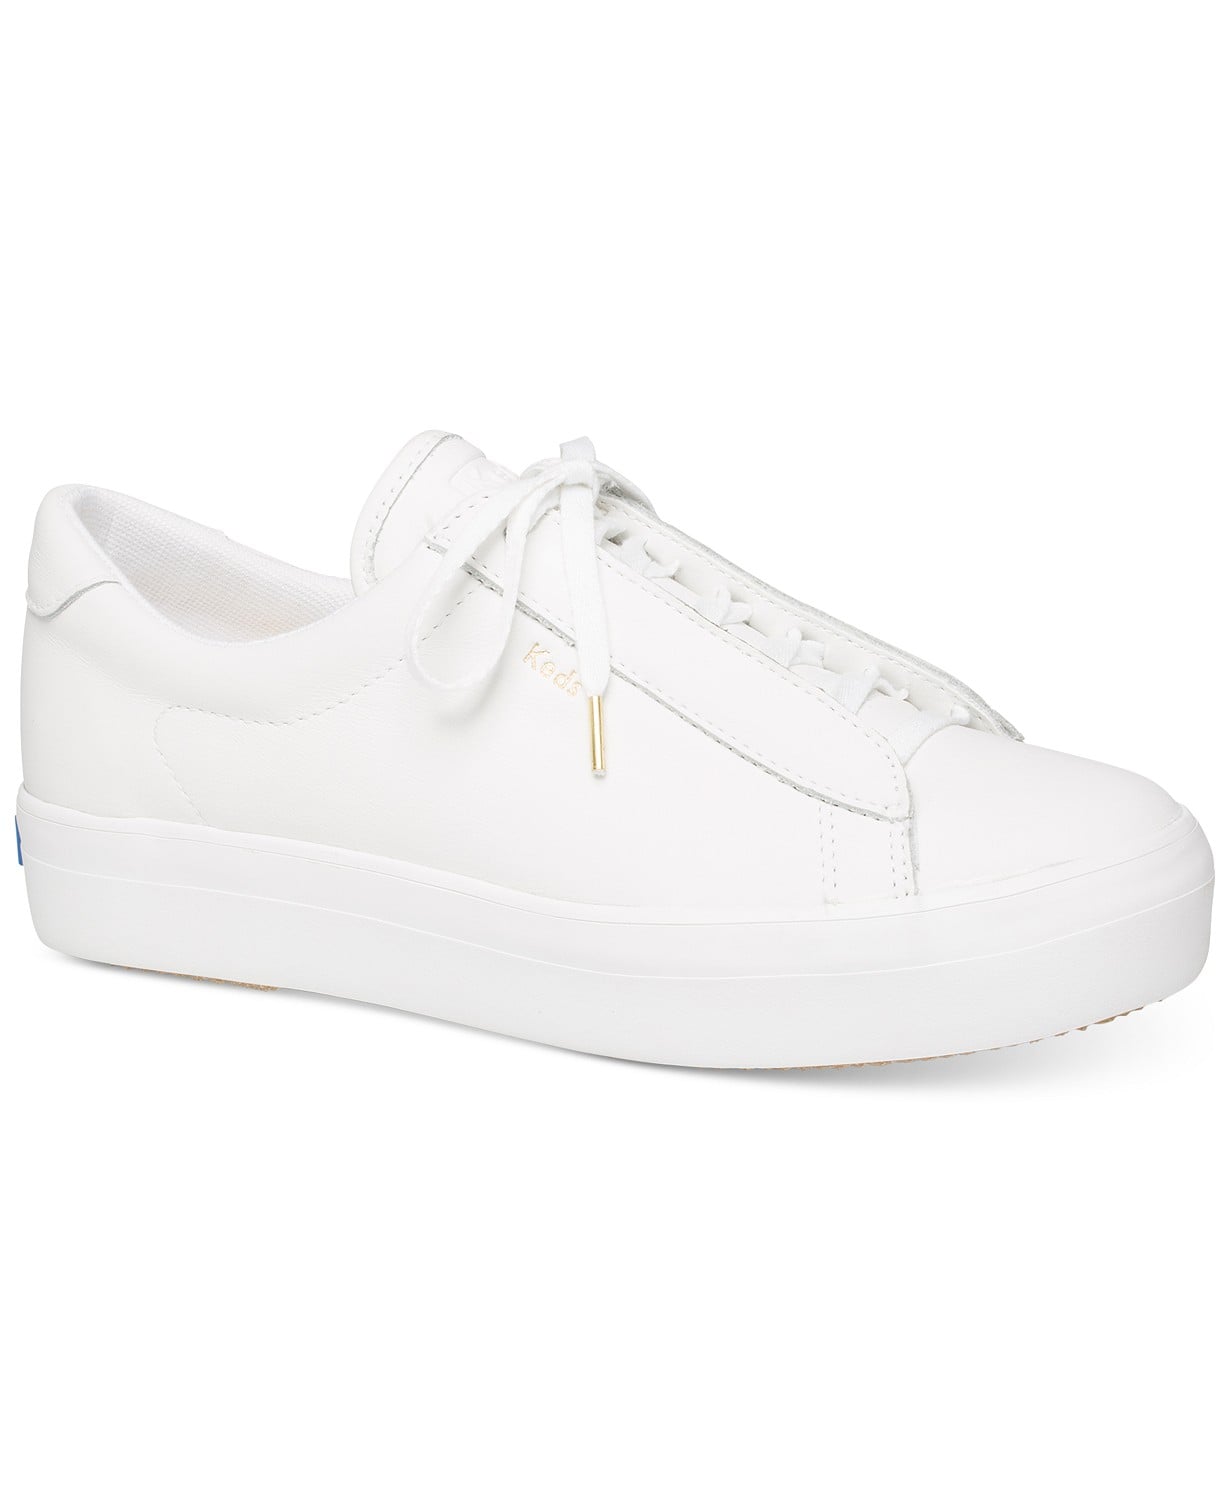 Keds Rise Metro Leather Sneakers